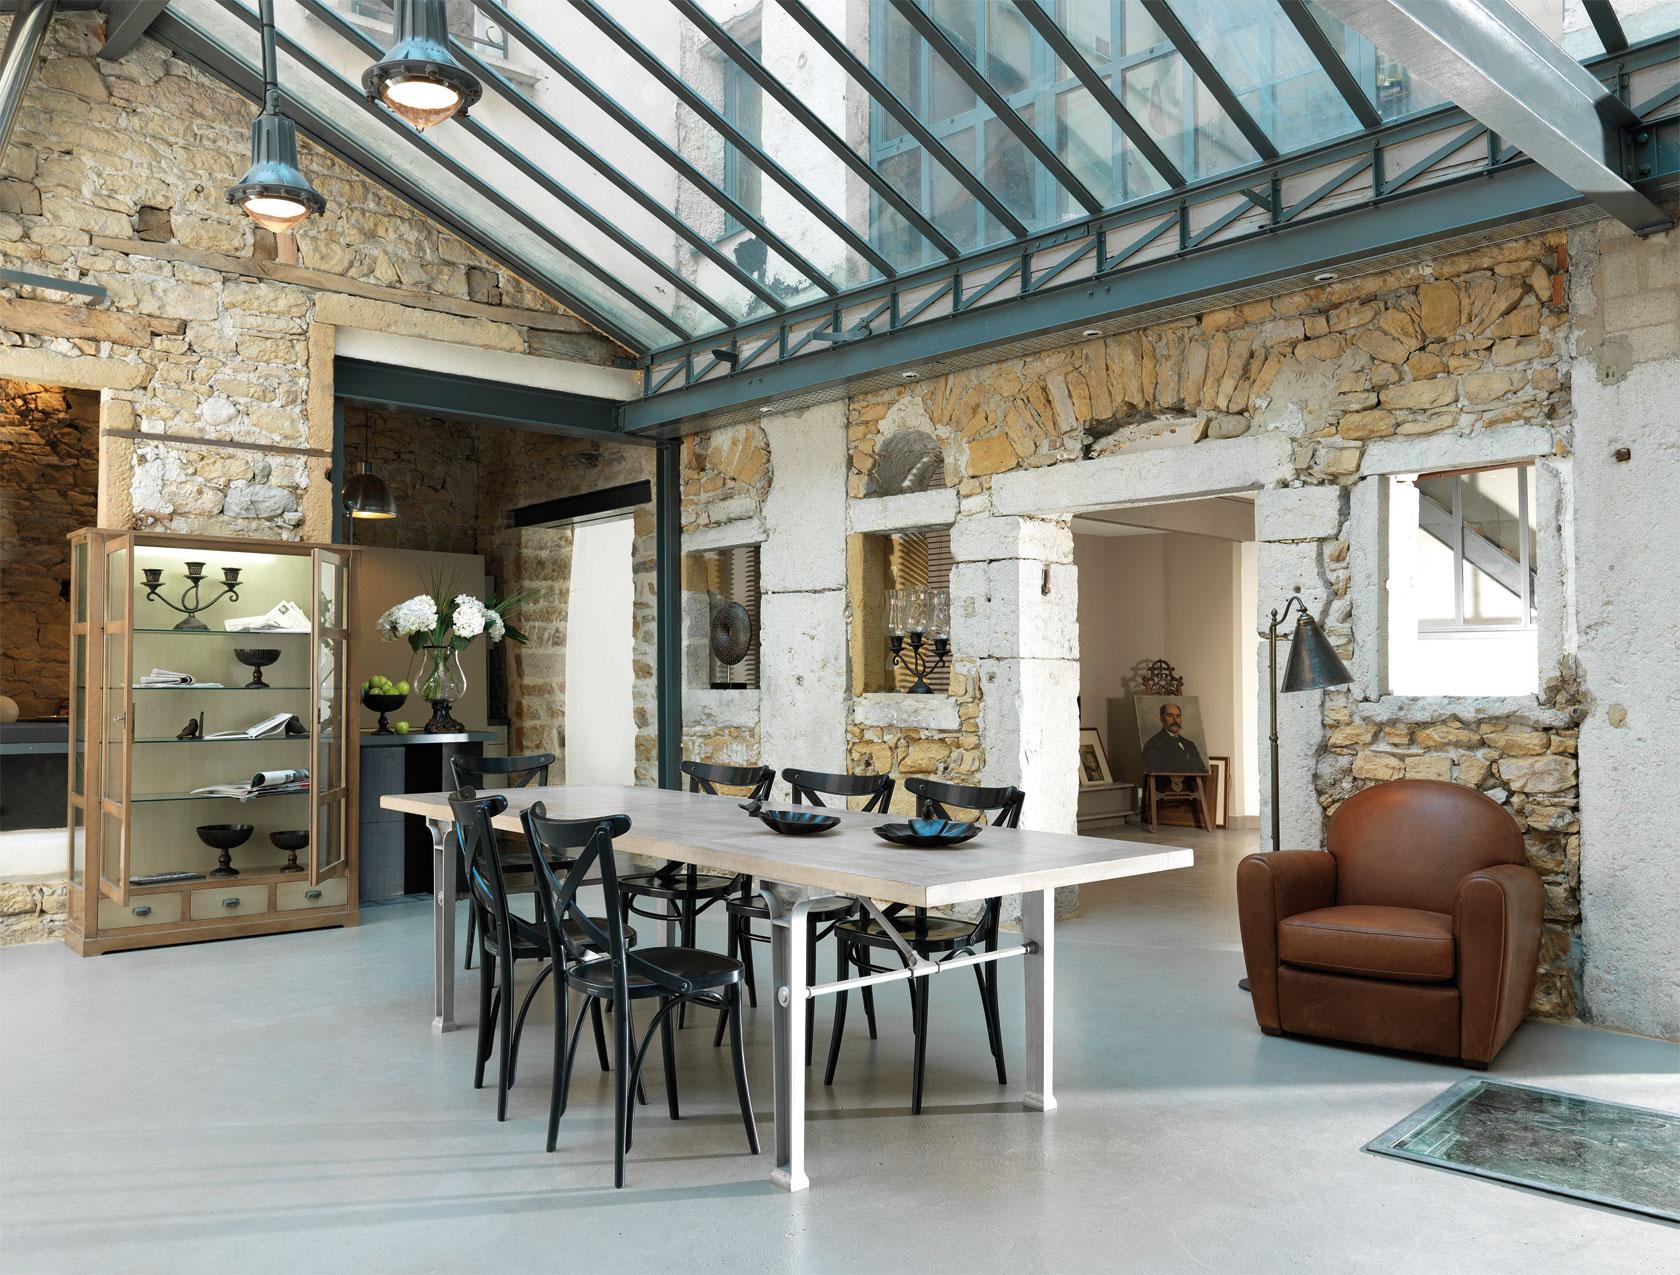 Exciting combination of stone walls and glass roof-stone wall interior design spacious dining room designer